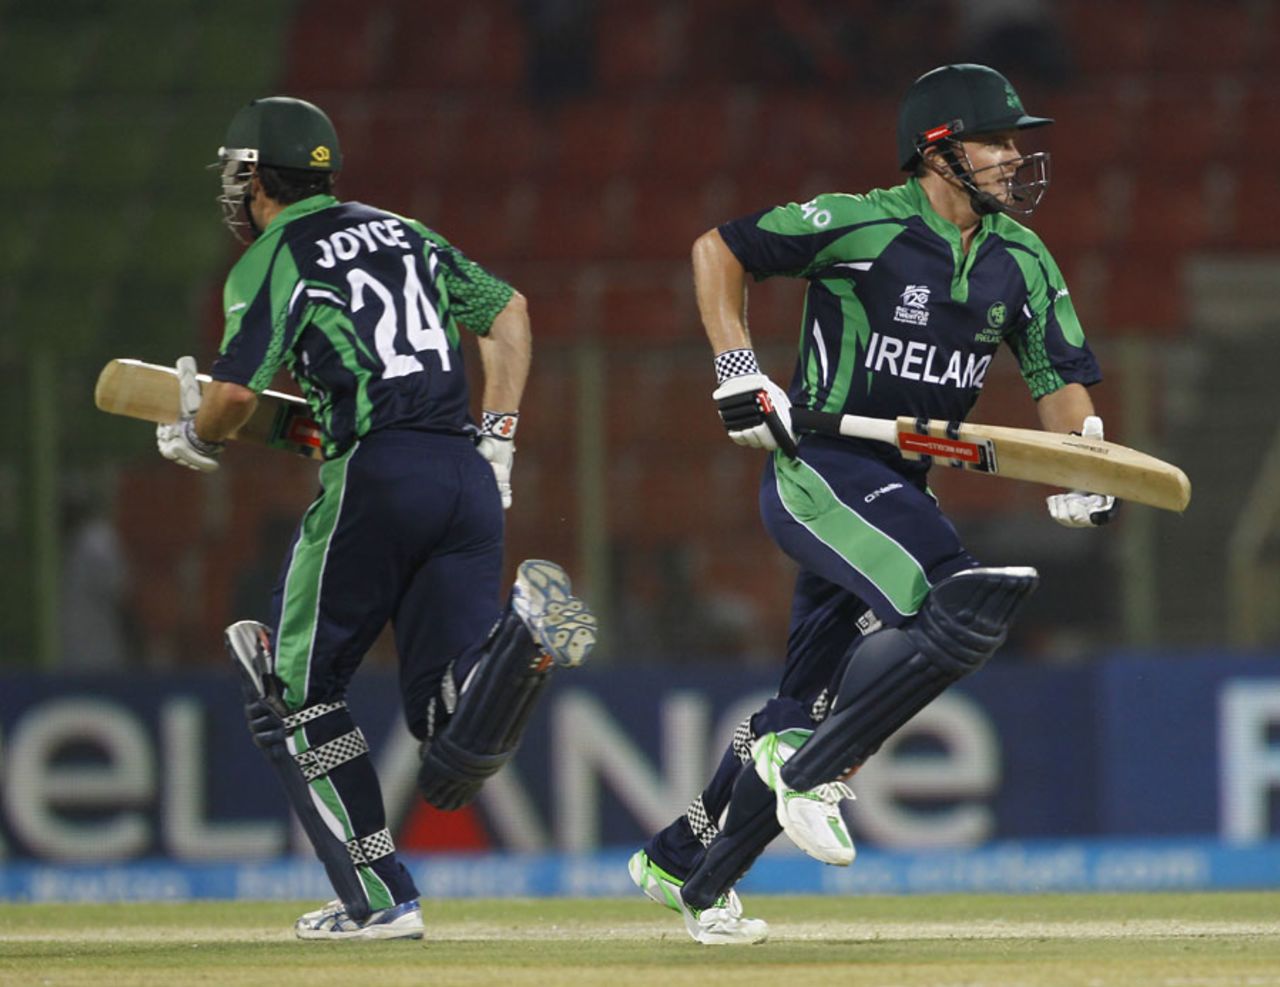 Ed Joyce and William Porterfield shared an 80-run stand for the second wicket, World Twenty20, Group B, Sylhet